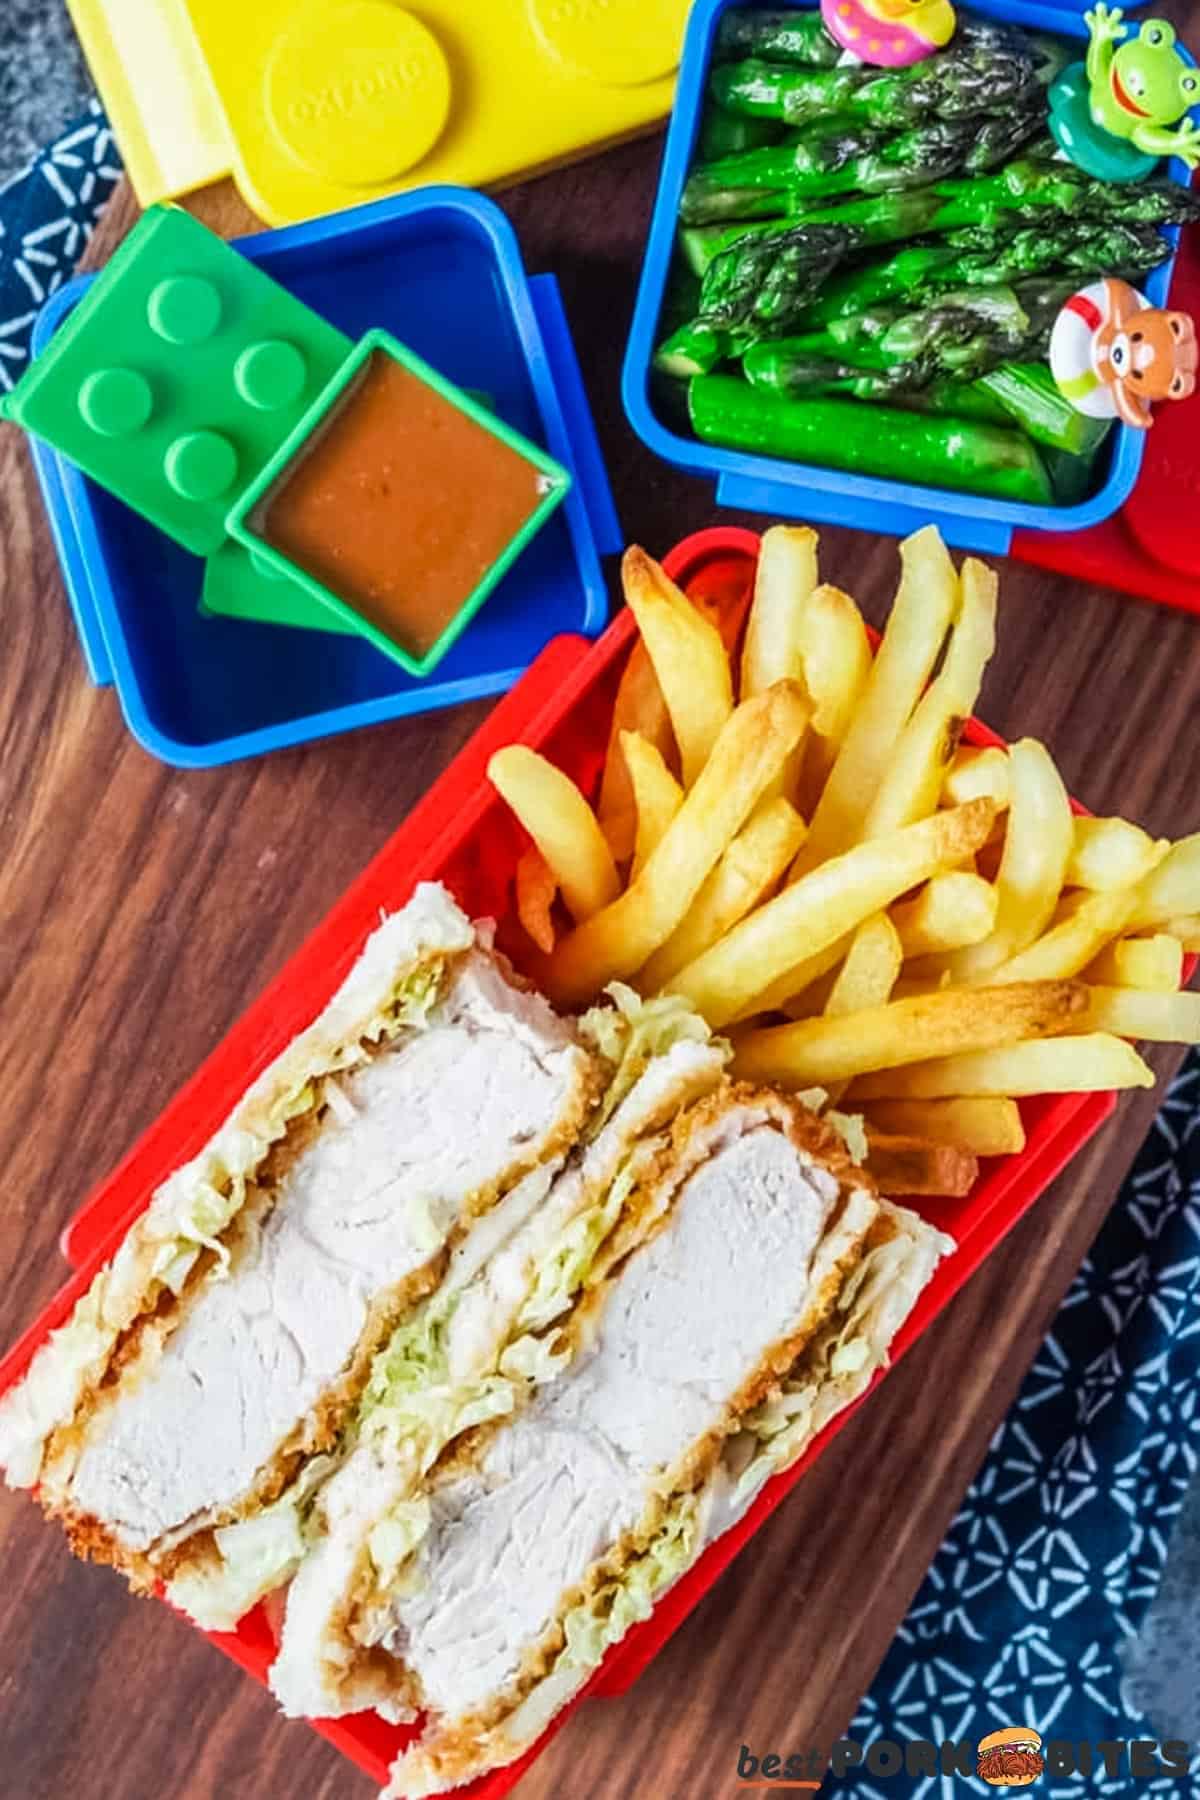 katsu sando, fries, asparagus and katsu sauce in separate colorful containers